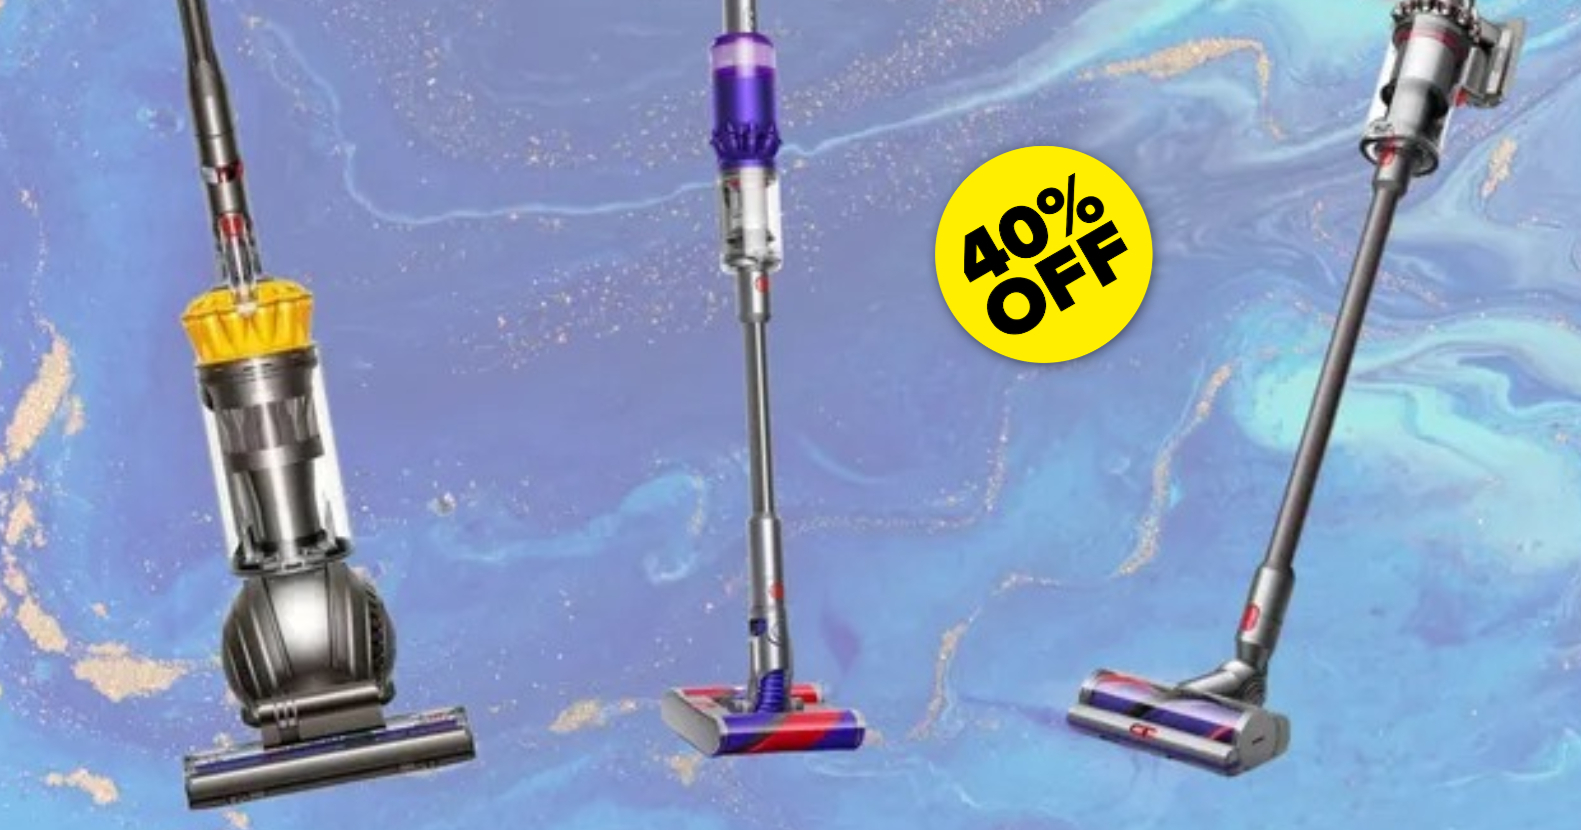 Dyson Vacuums Are Up To 40% Off Walmart Right